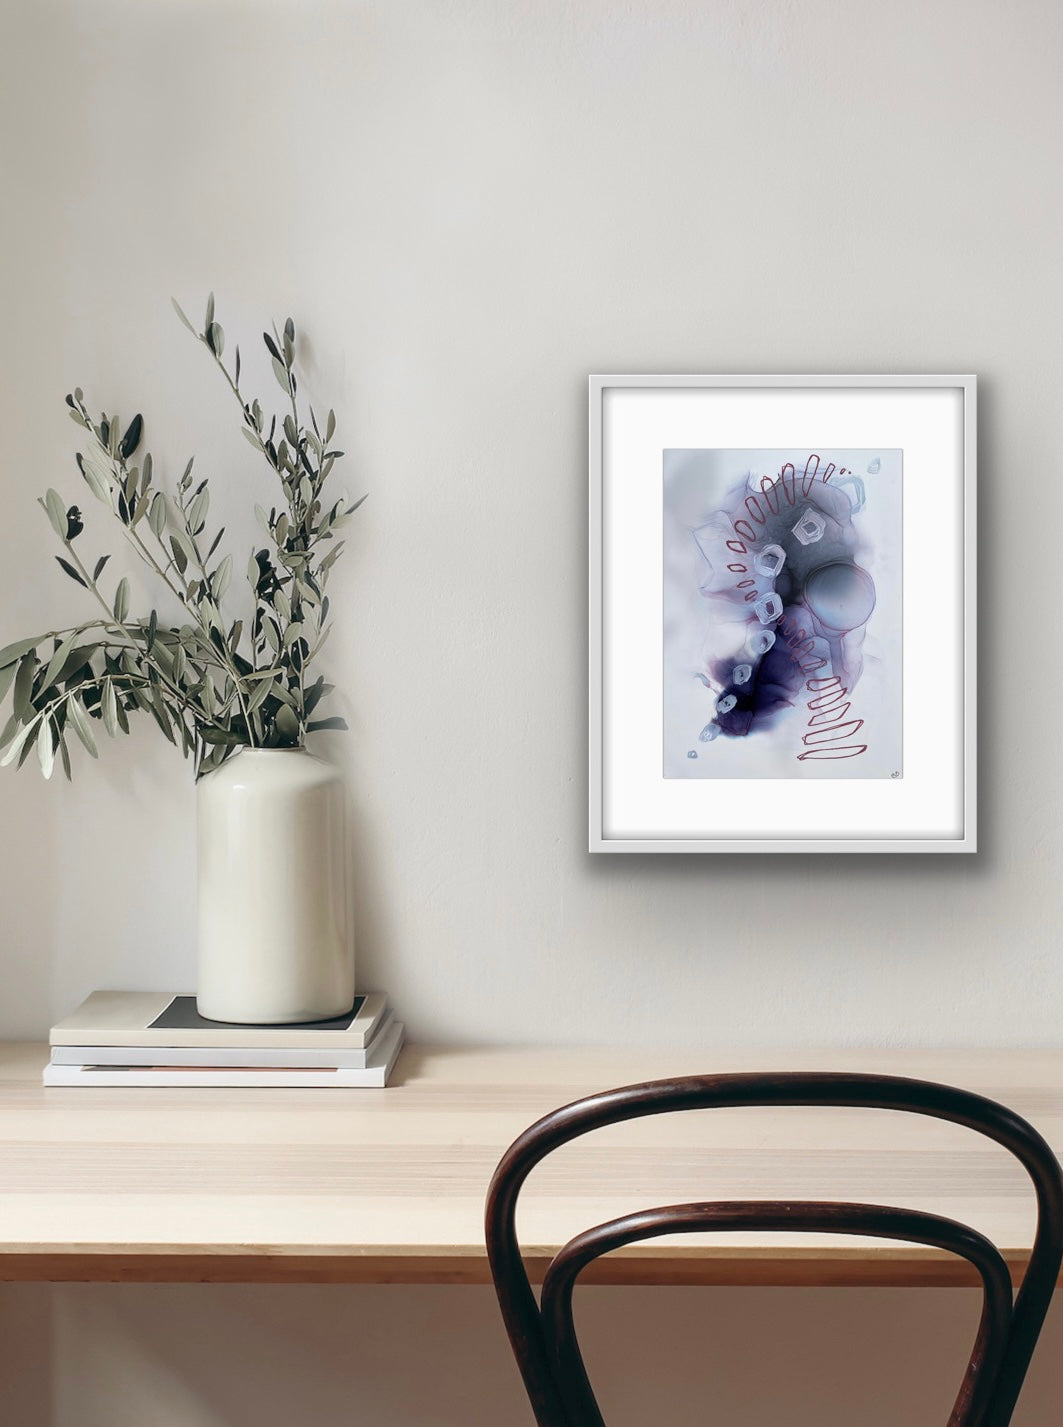 Within Temptation, original abstract art in purples.